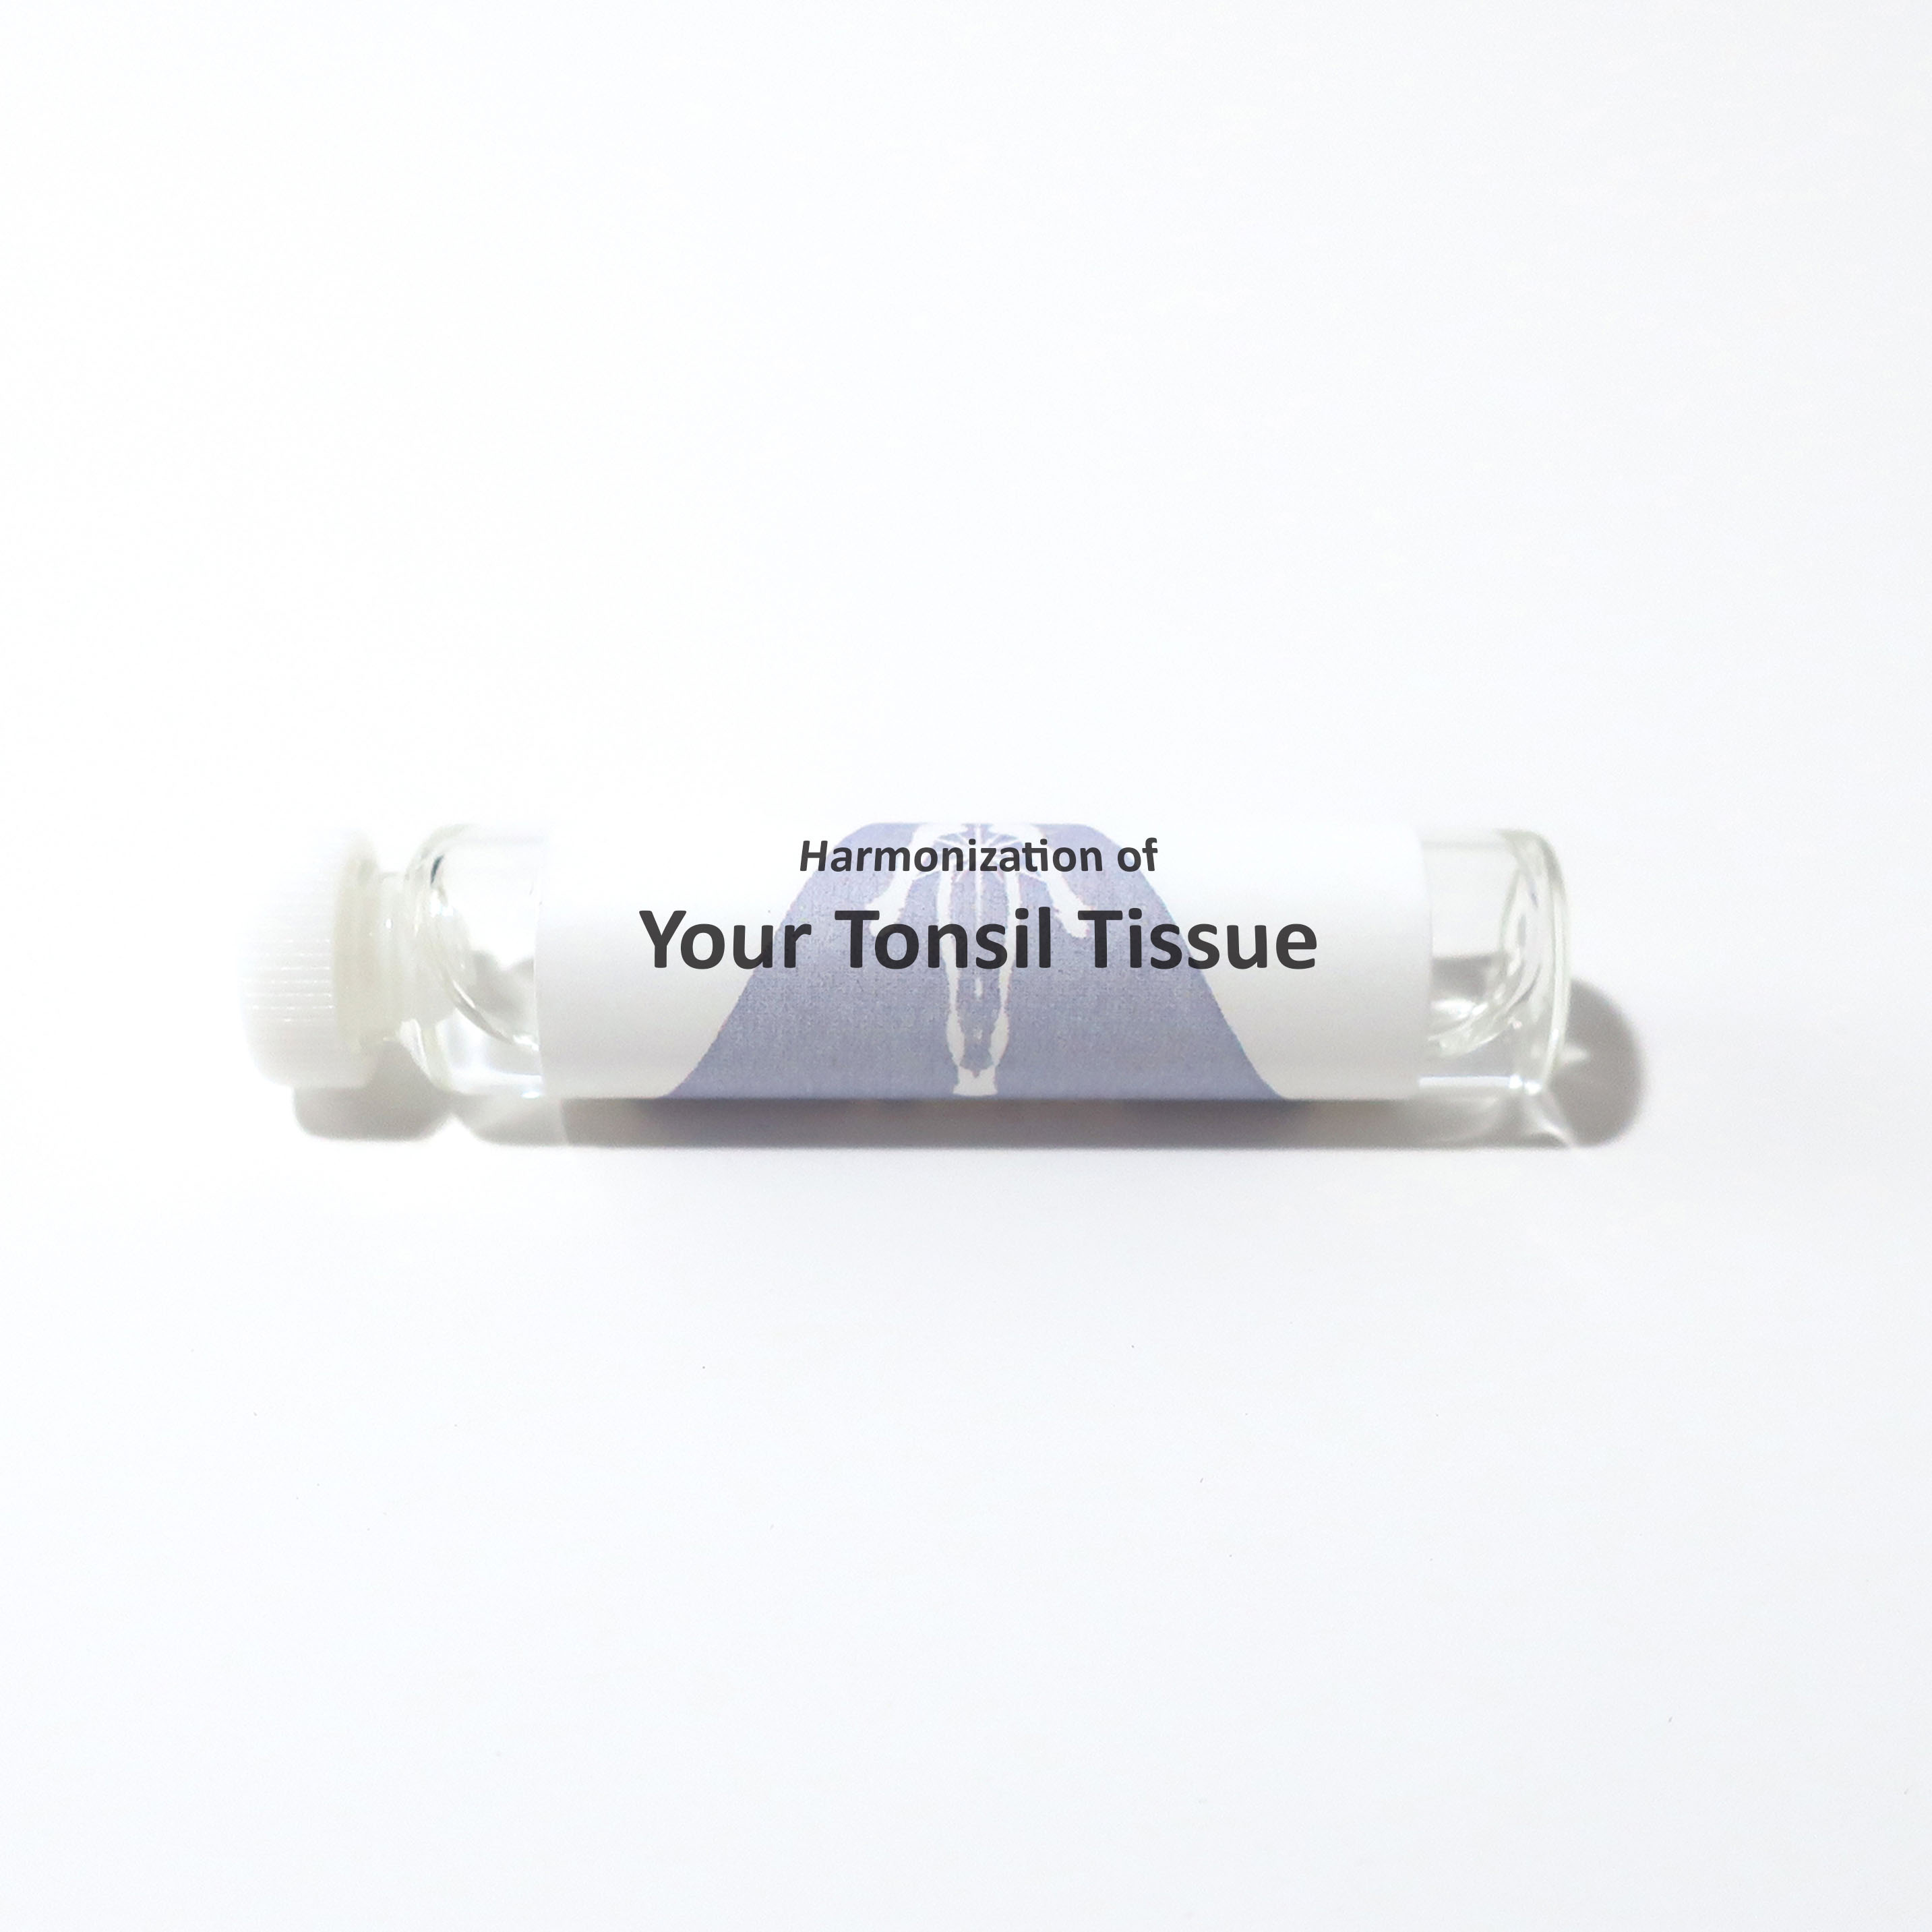 Your Tonsil Tissue